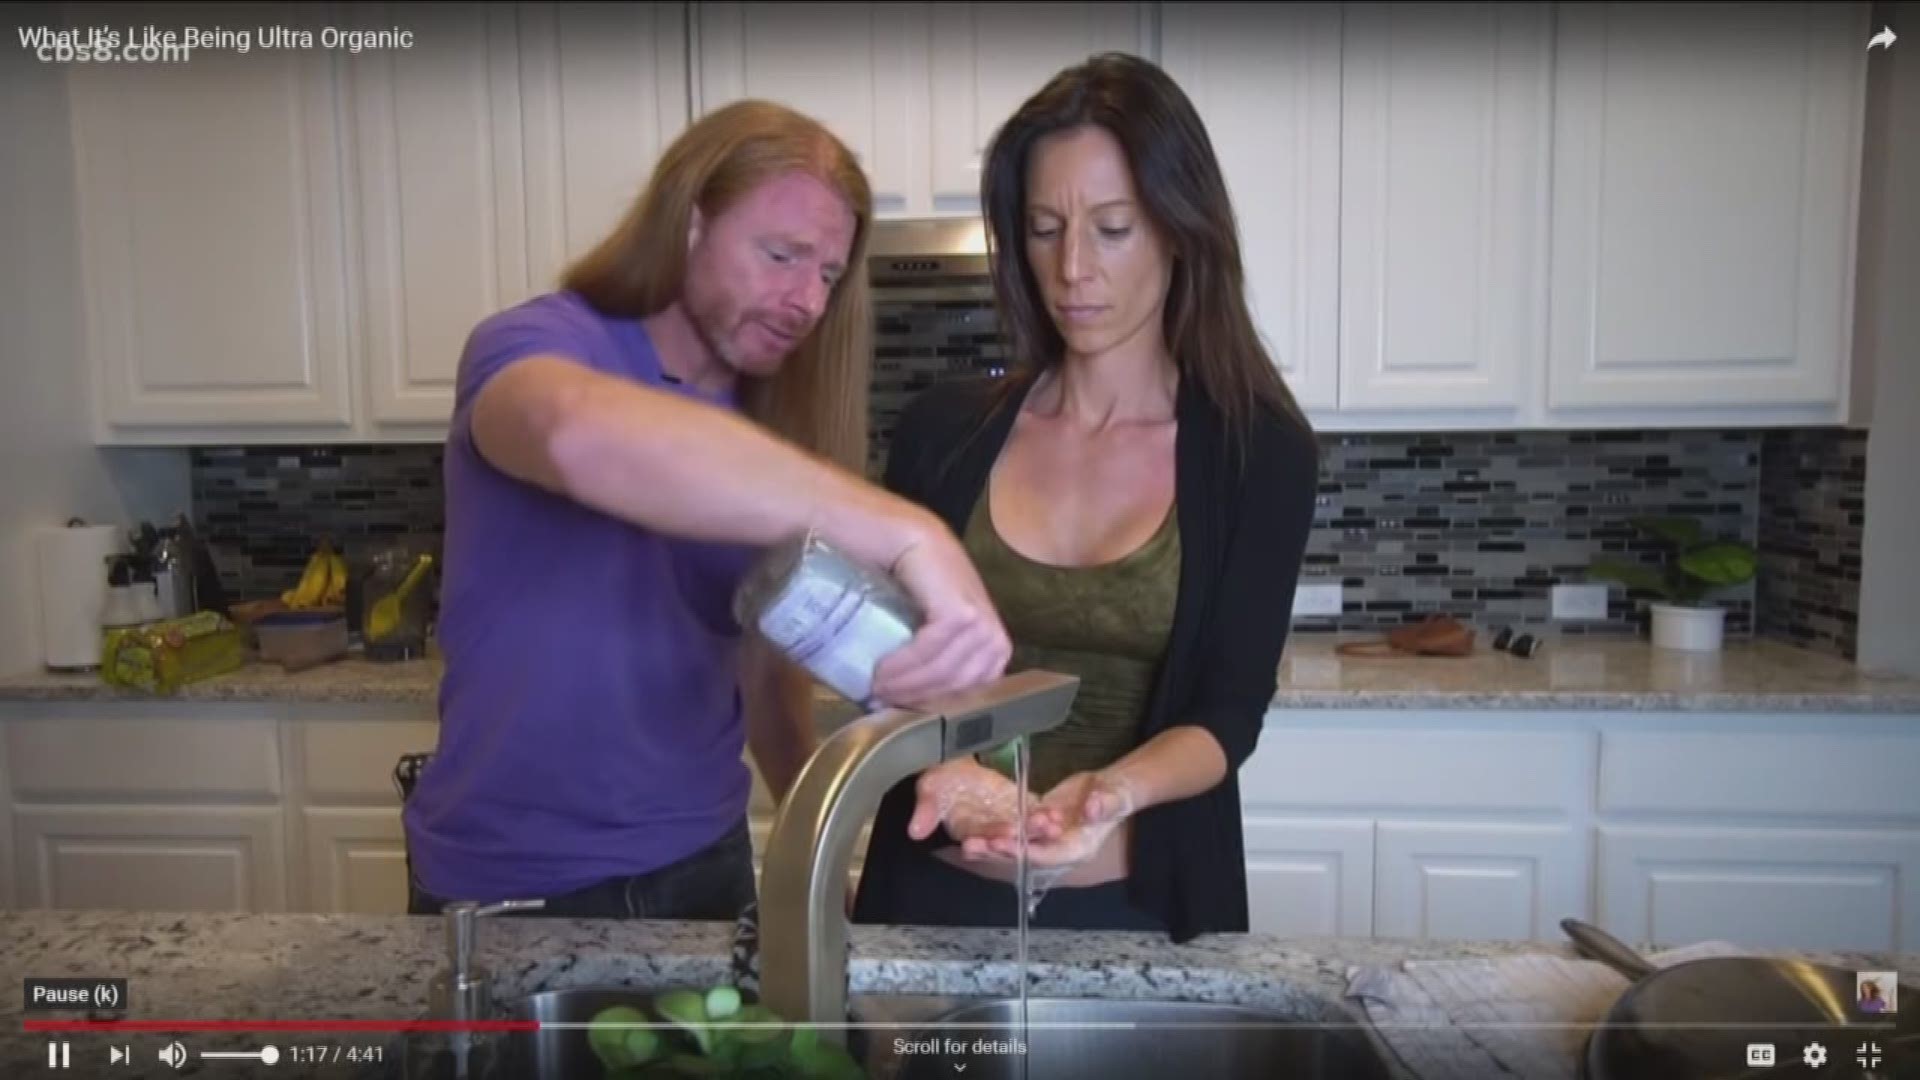 JP Sears talks about all the ways he is using his time at home with his wife, and how it is still very important to laugh.